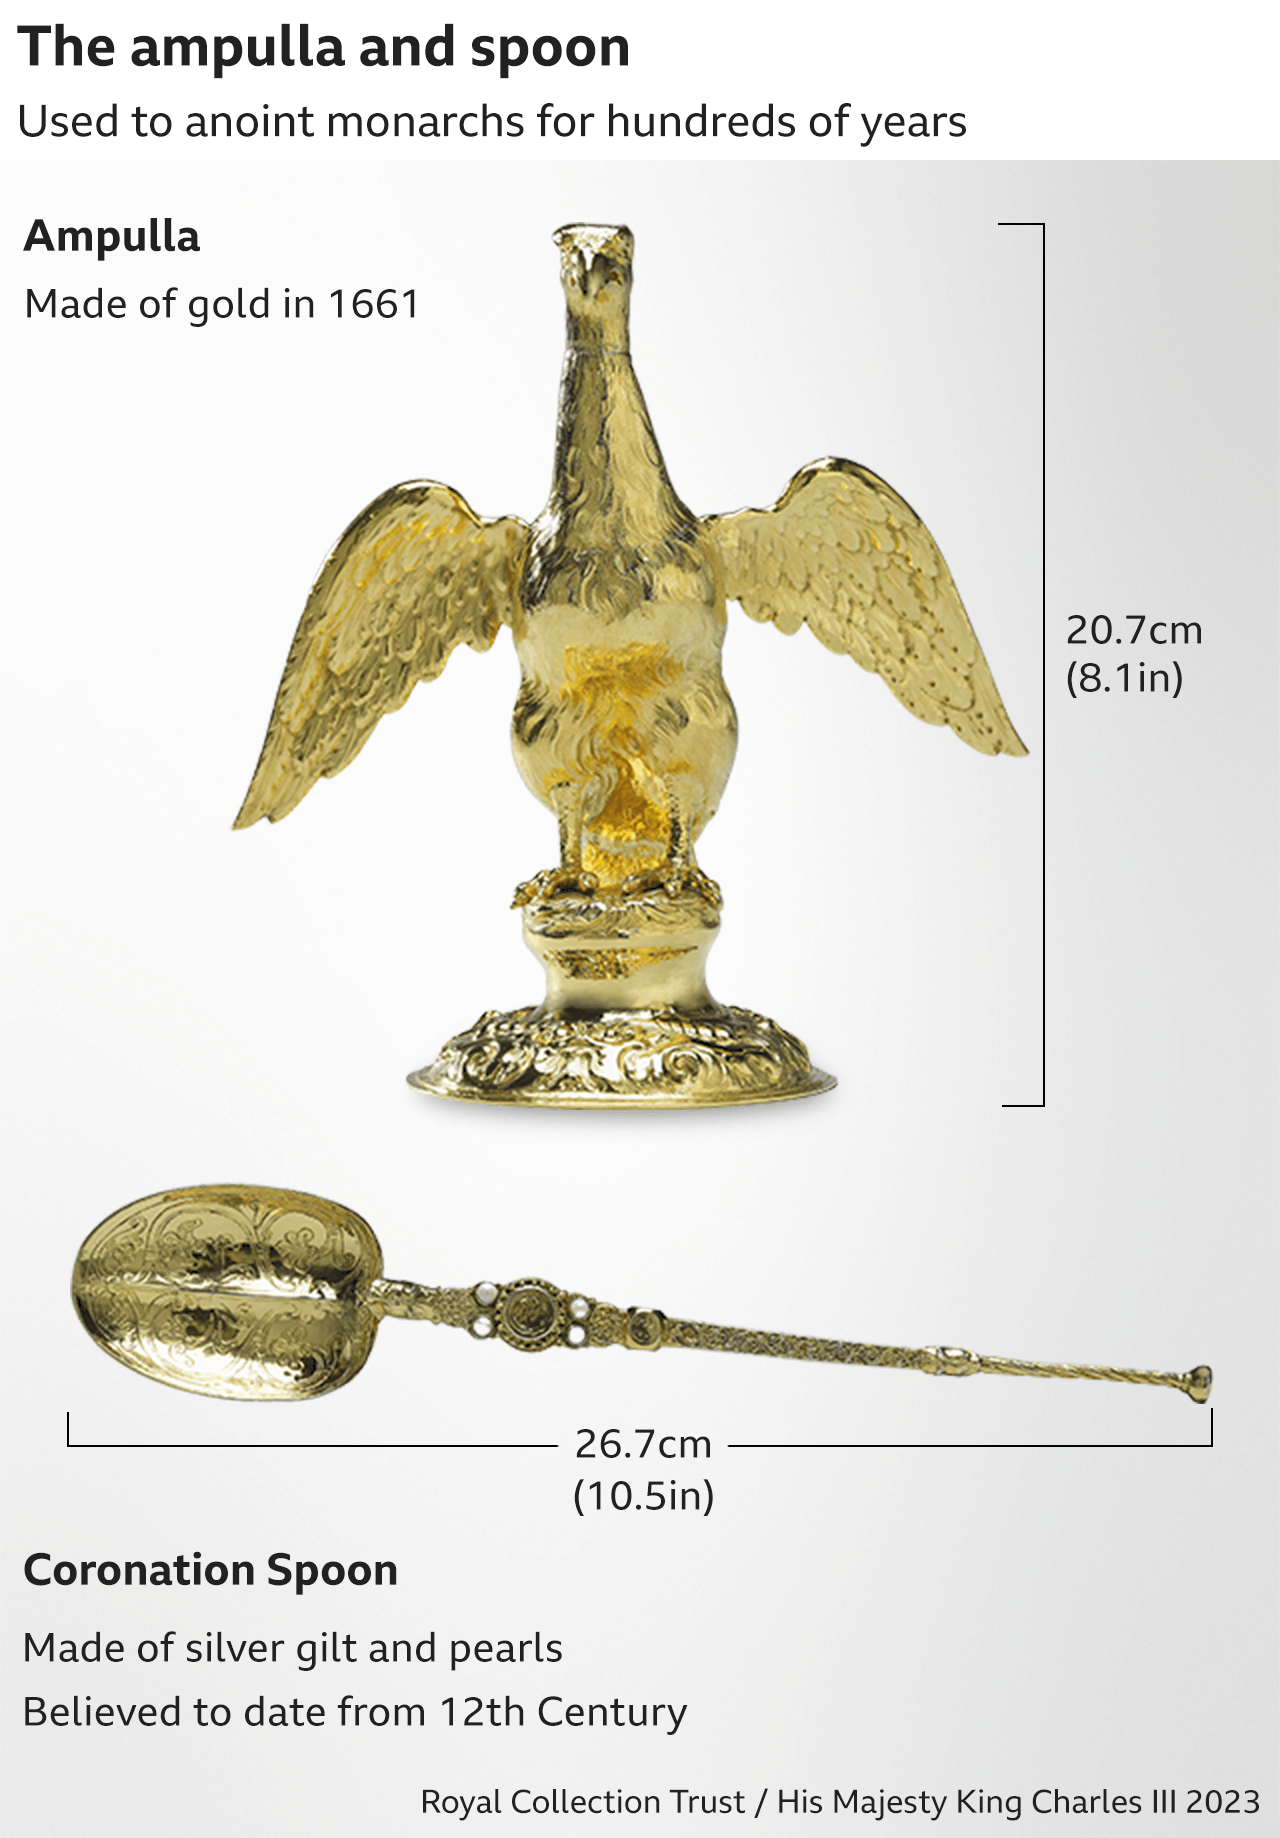 Graphic showing the ampulla is about 21cm tall and made of gold while the Coronation Spoon is about 27cm long and made of silver gilt and pearls